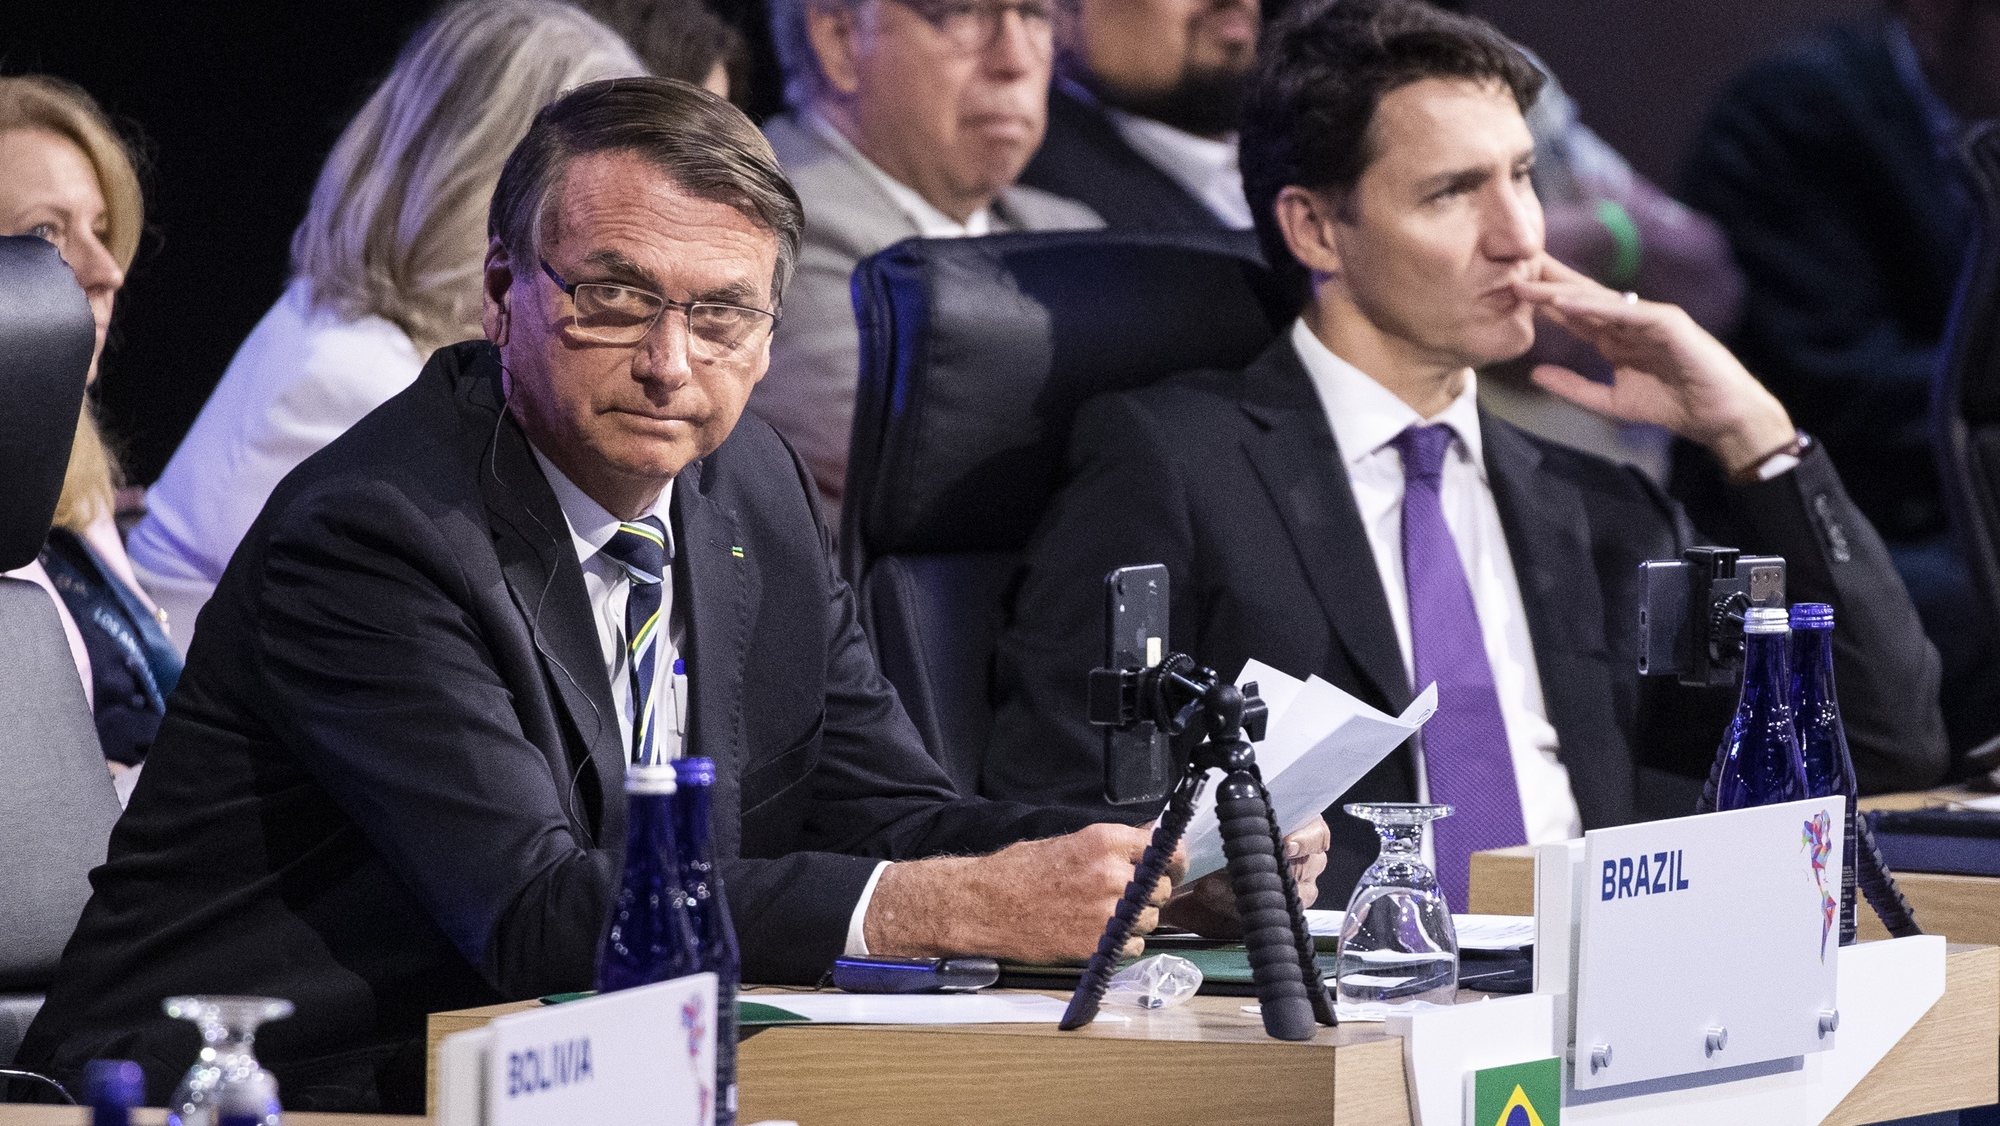 epa10006441 Prime Minister of Canada Justin Trudeau (R) and President of Brazil Jair Bolsonaro attend the second plenary session of the 2022 Summit of the Americas in Los Angeles, California, USA, 10 June 2022.  EPA/ETIENNE LAURENT